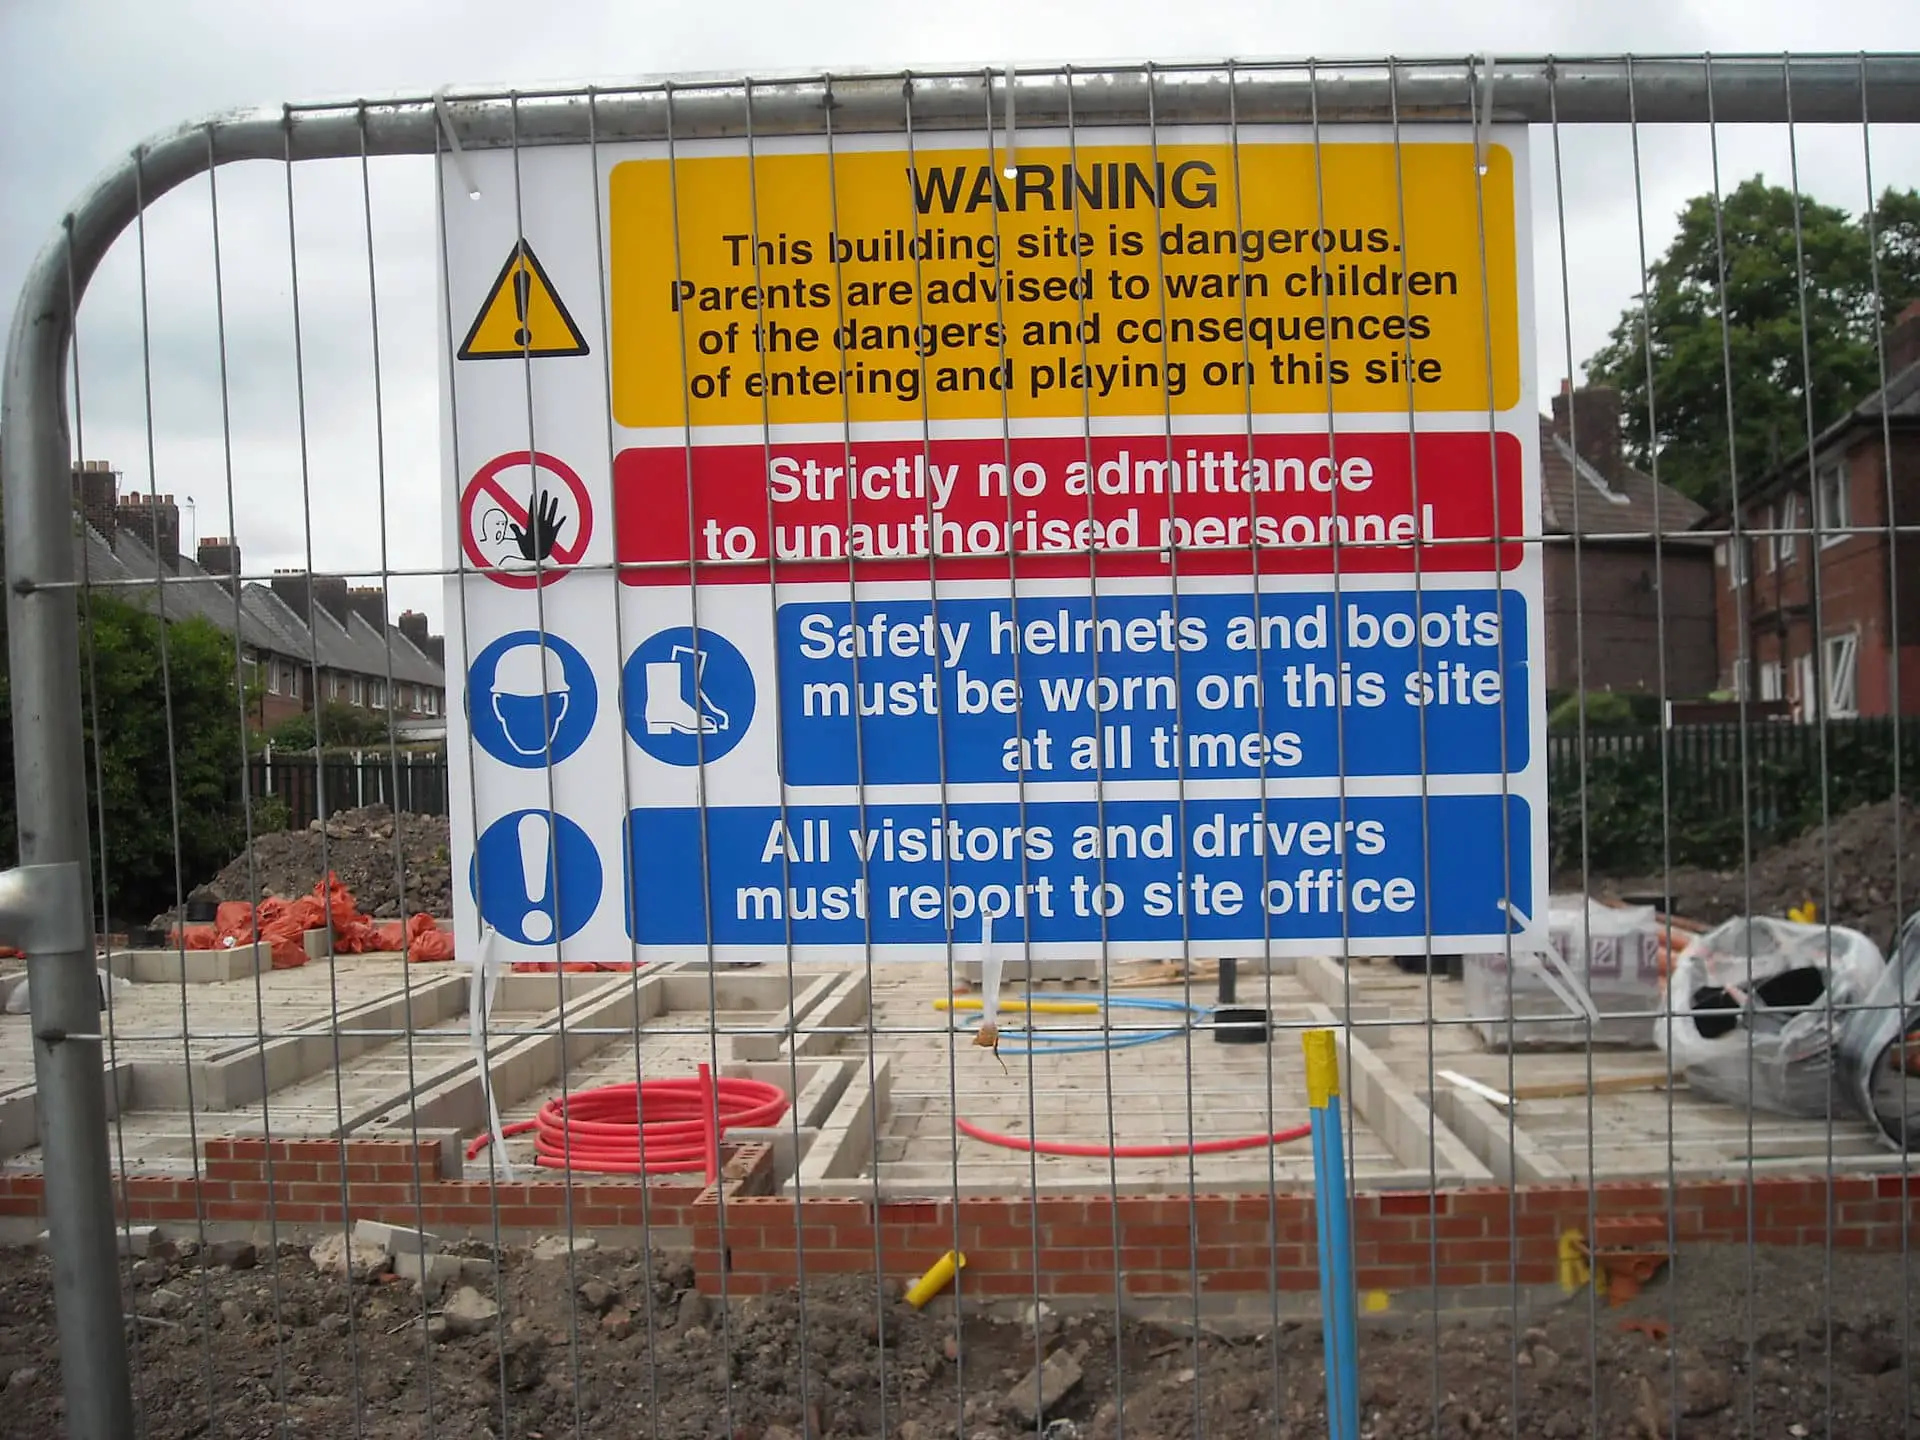 Sign on fencing of building site